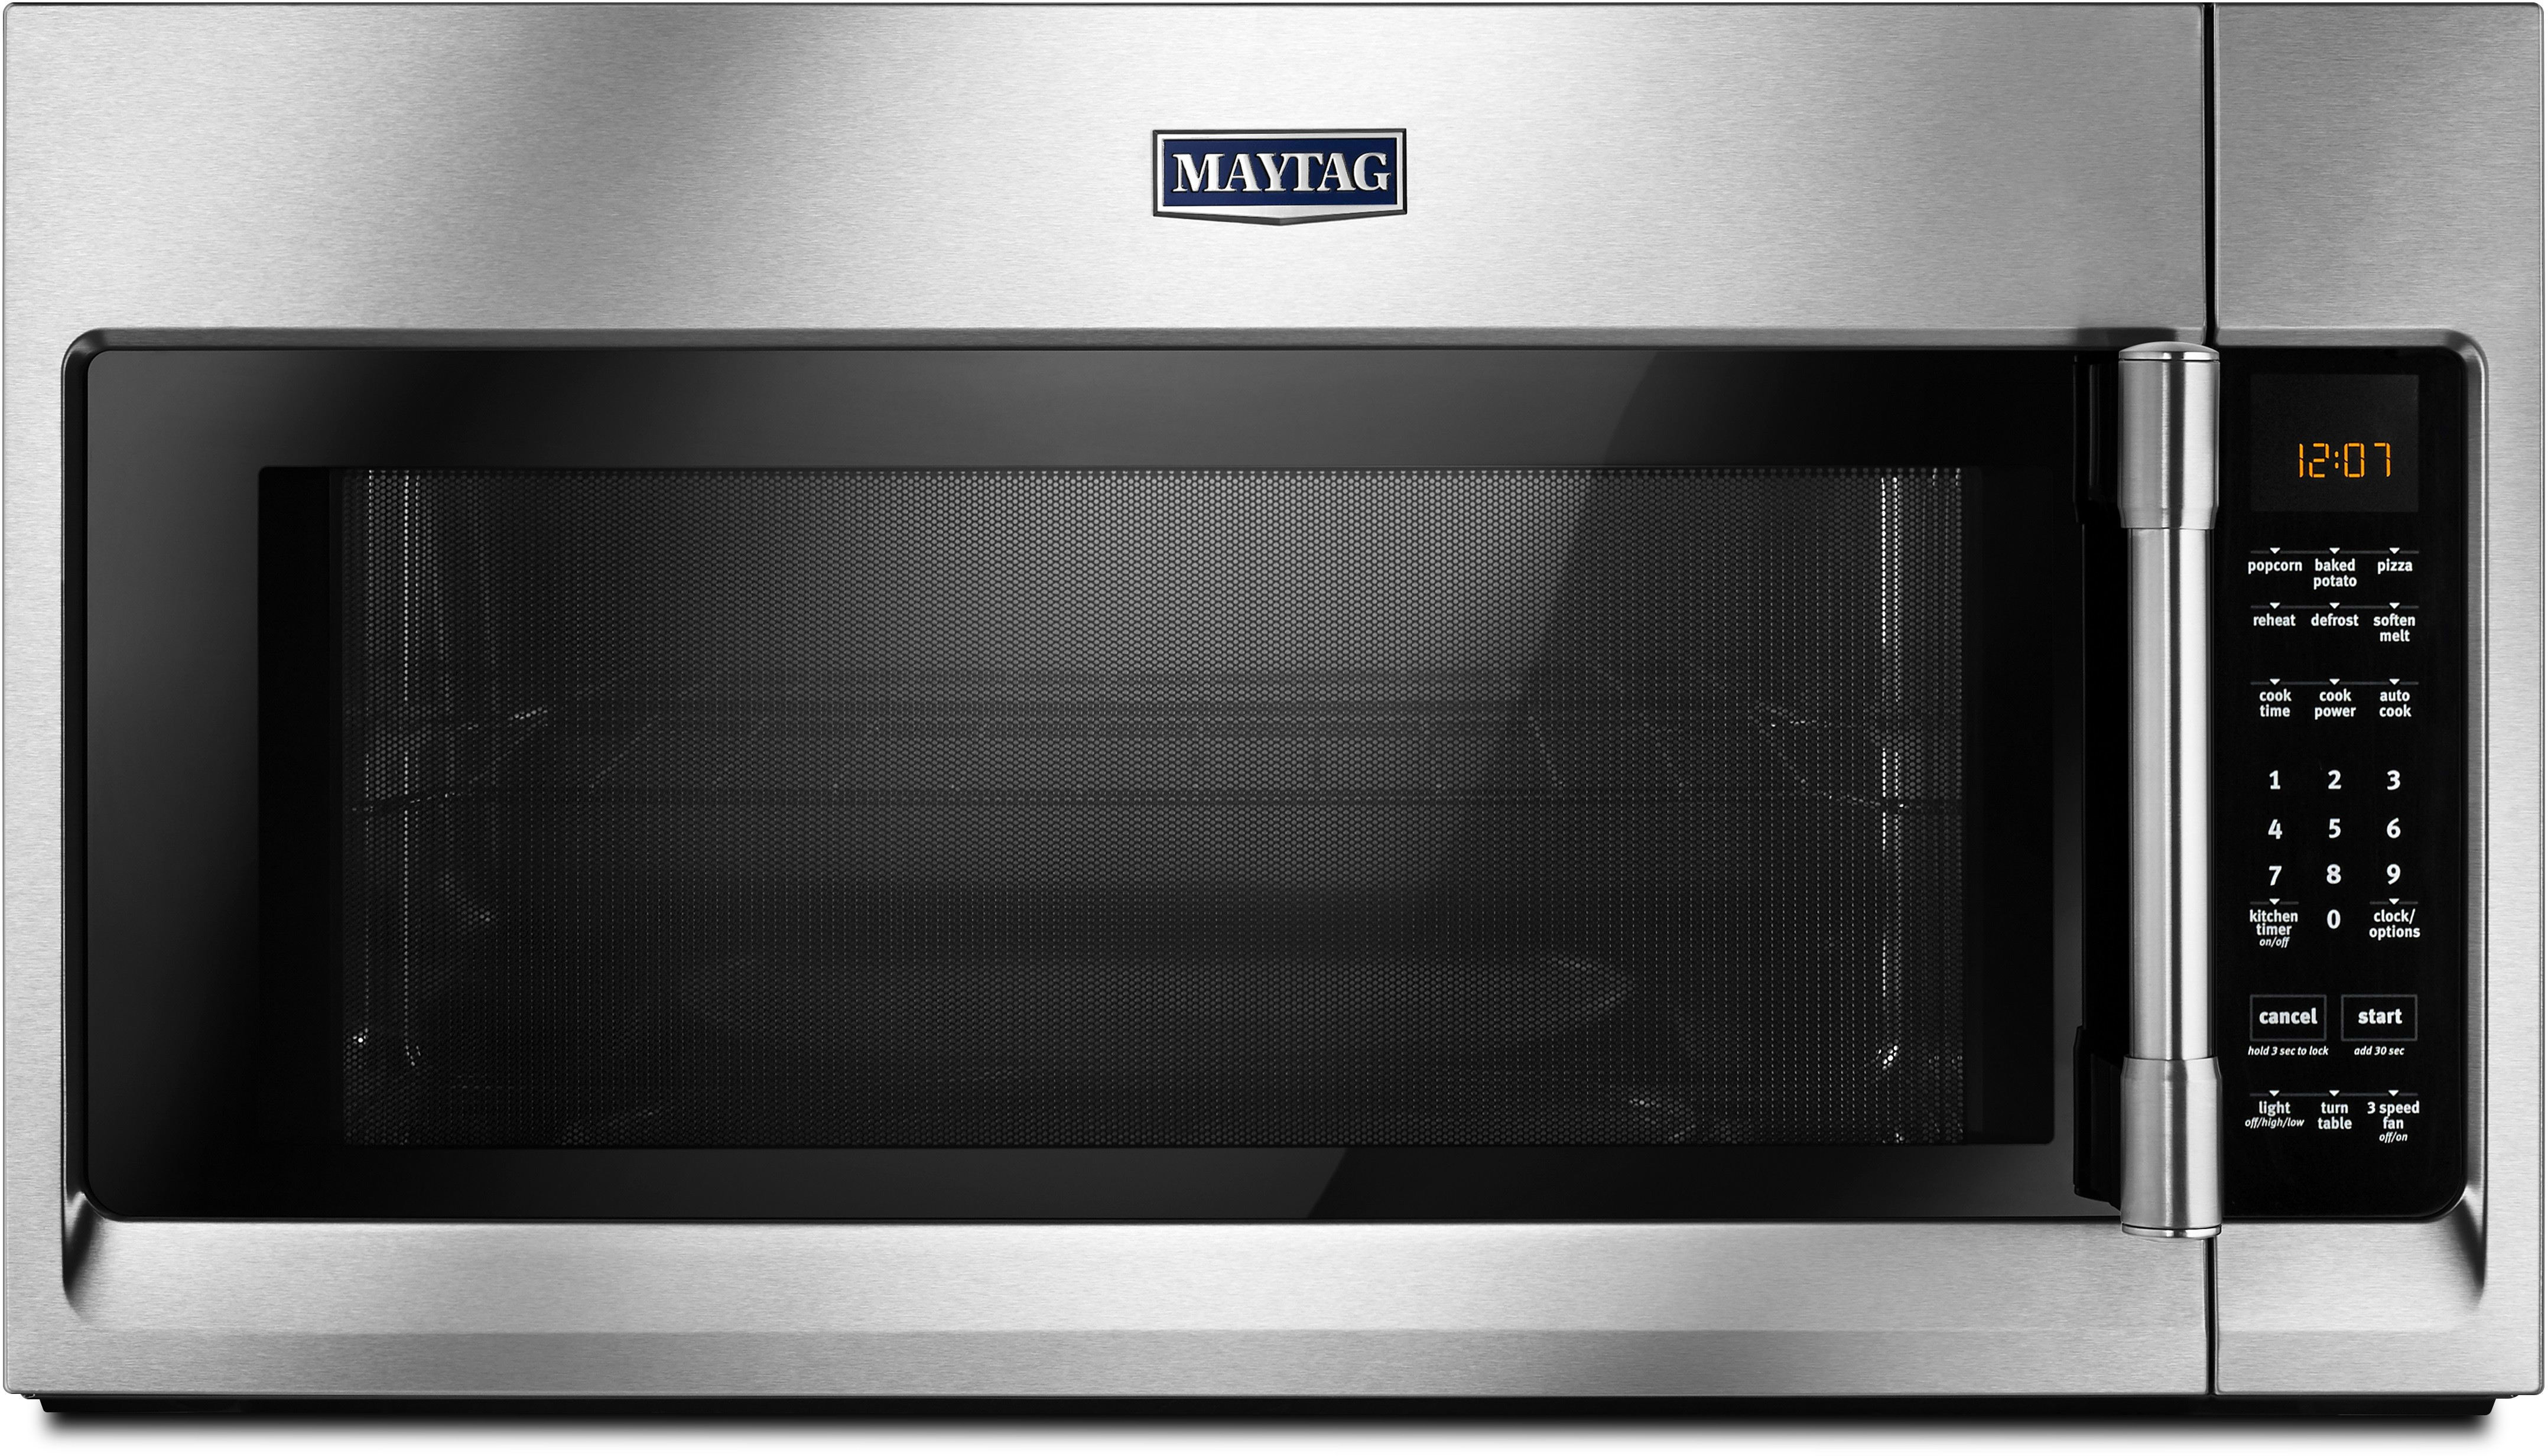 Maytag MMV4206FZ 2.0 cu. ft. Over-the-Range Microwave Oven with Sensor